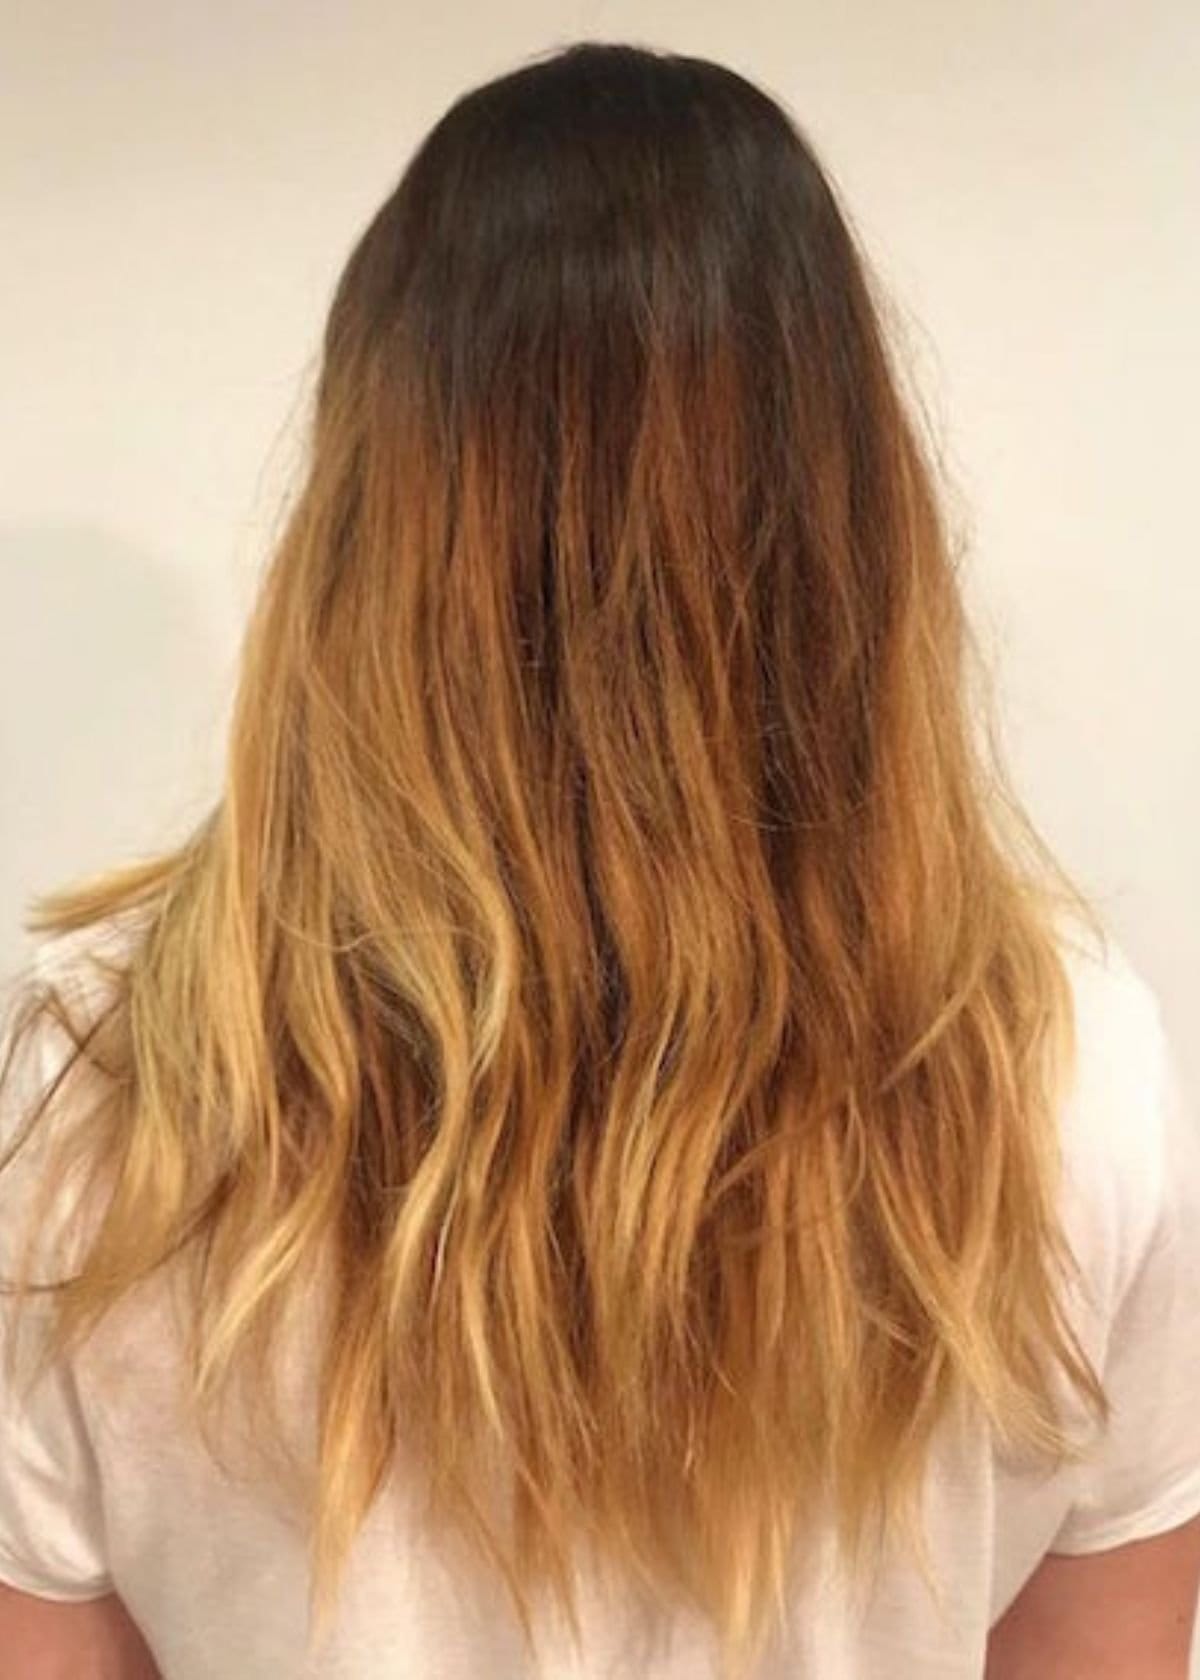 How to Get Rid of Brassy Hair without Toner